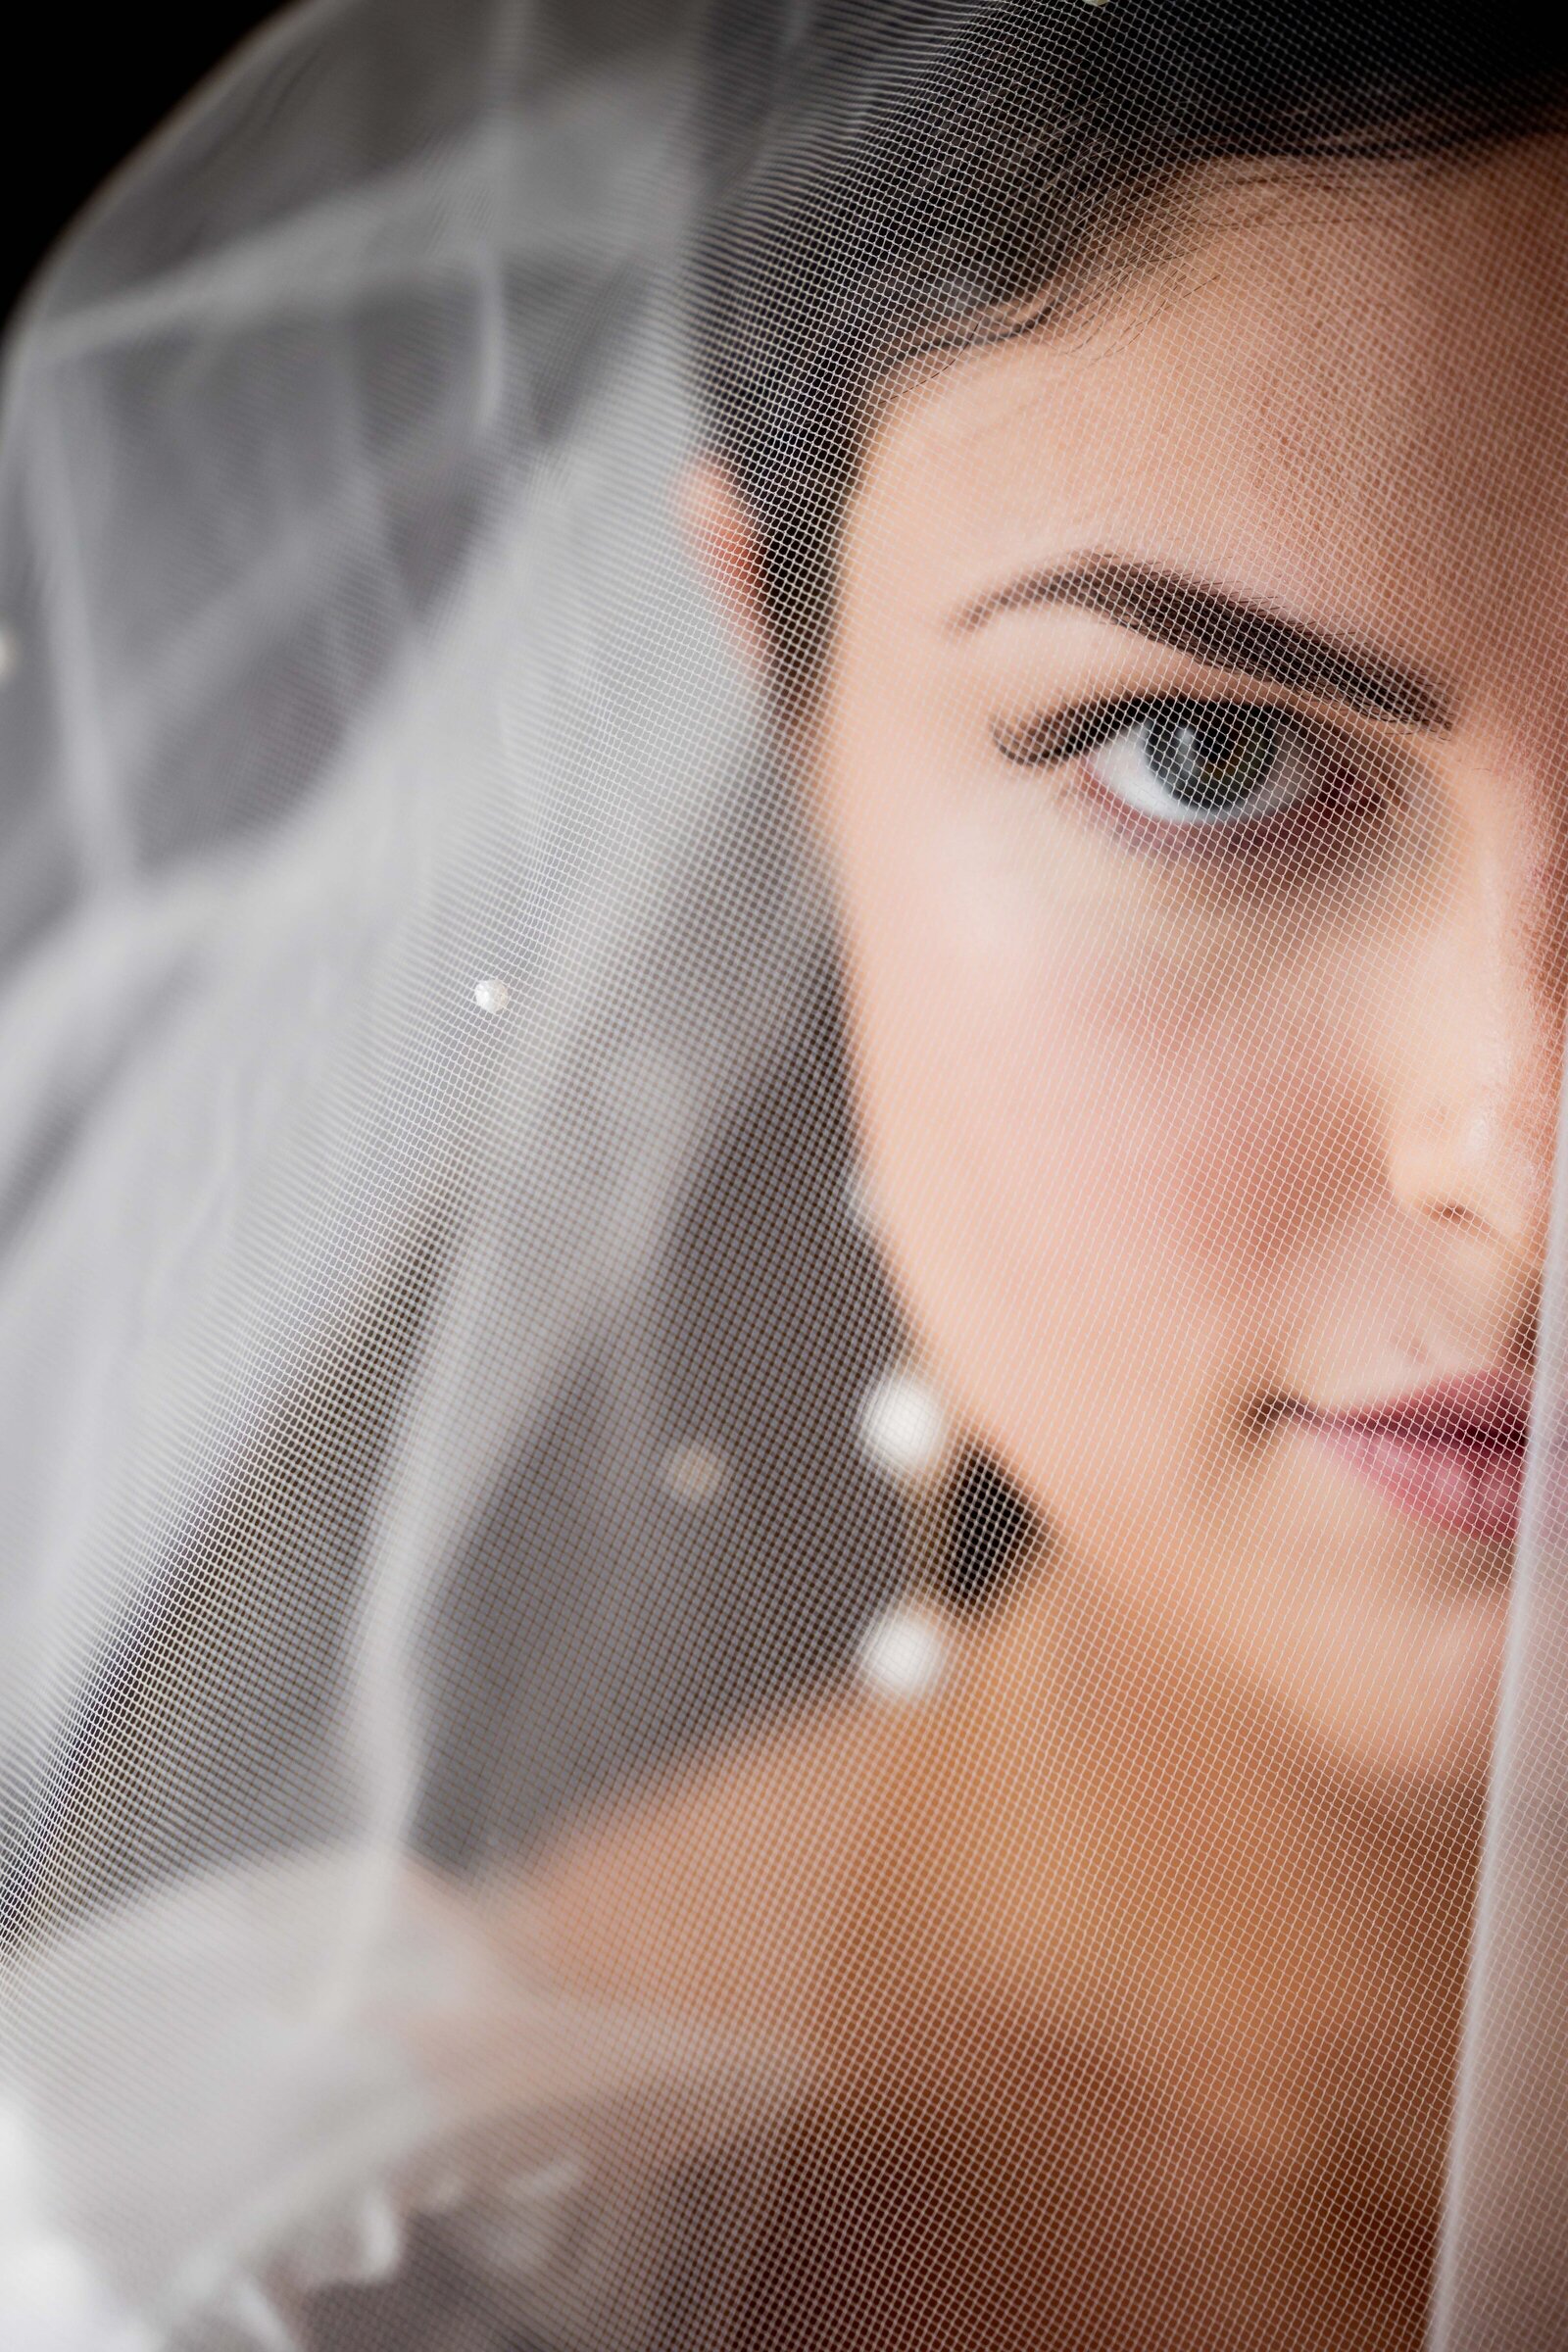 Step into the ethereal elegance of Katherine’s wedding day with this stunning portrait captured under her delicate veil. This image beautifully highlights the intricate lace details of the veil as it softly envelops her, creating a serene and intimate atmosphere. The photograph emphasizes Katherine's grace and the exquisite features of her bridal look, making it a captivating inspiration for brides who envision a classic and romantic wedding style.